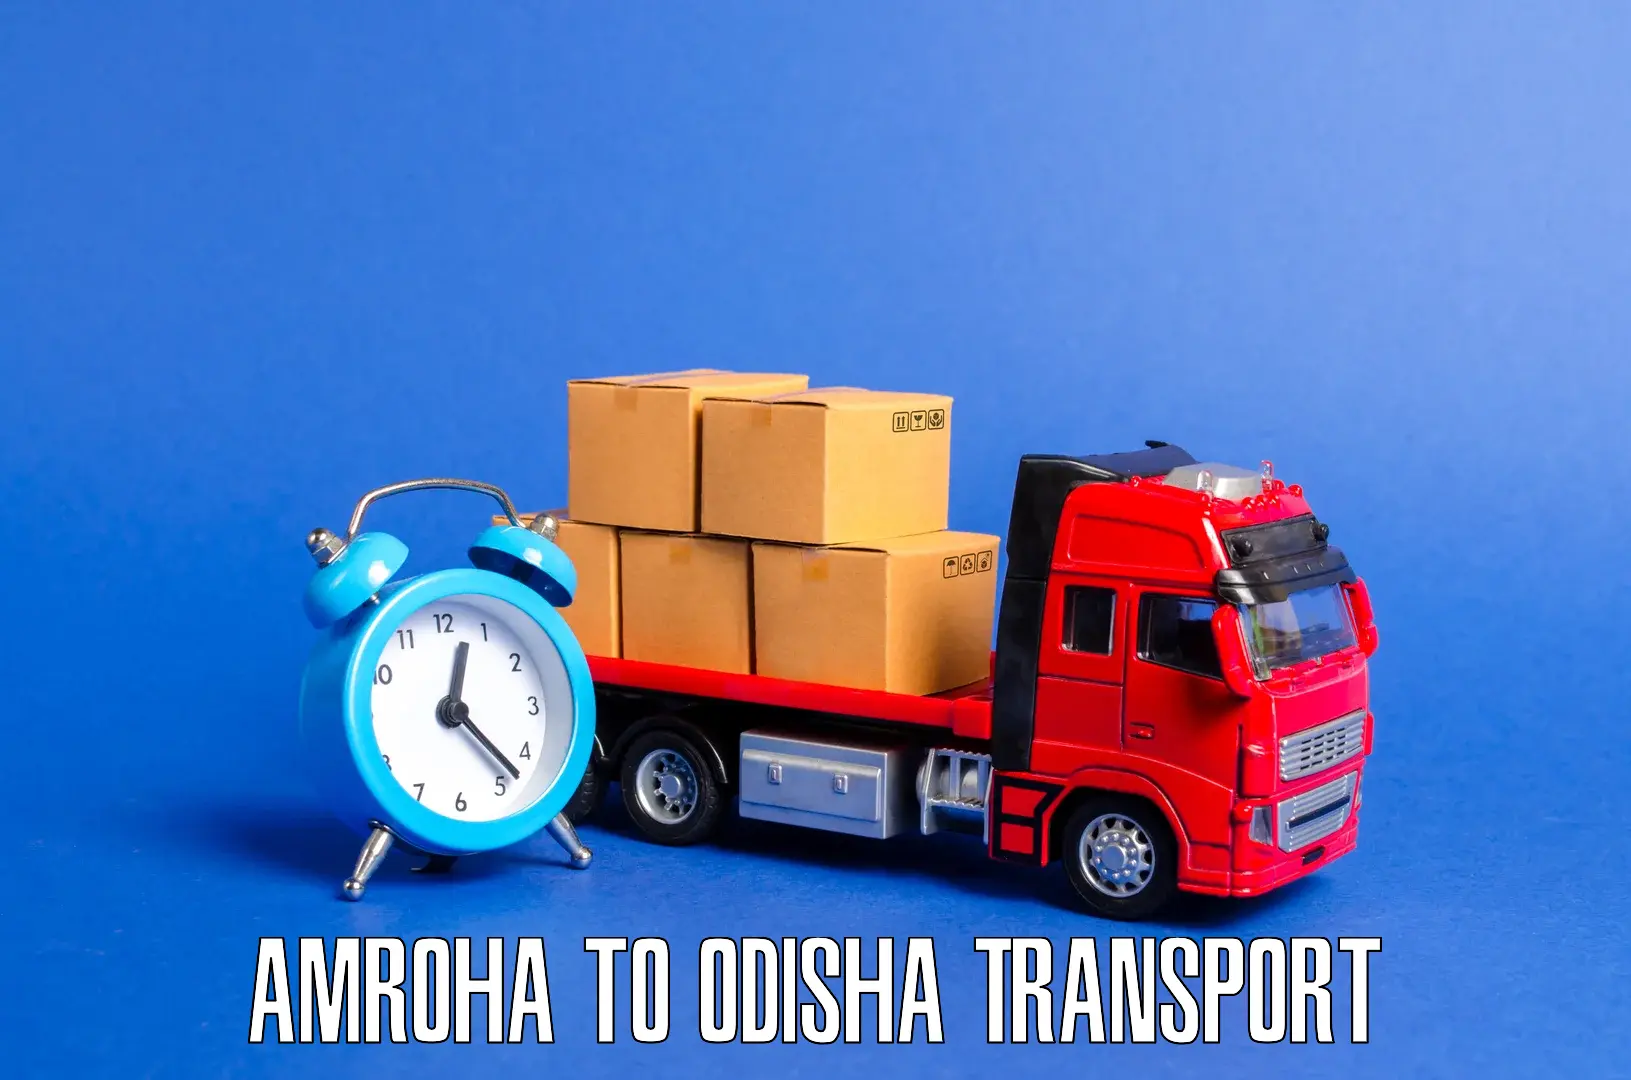 Nearest transport service in Amroha to Chandipur